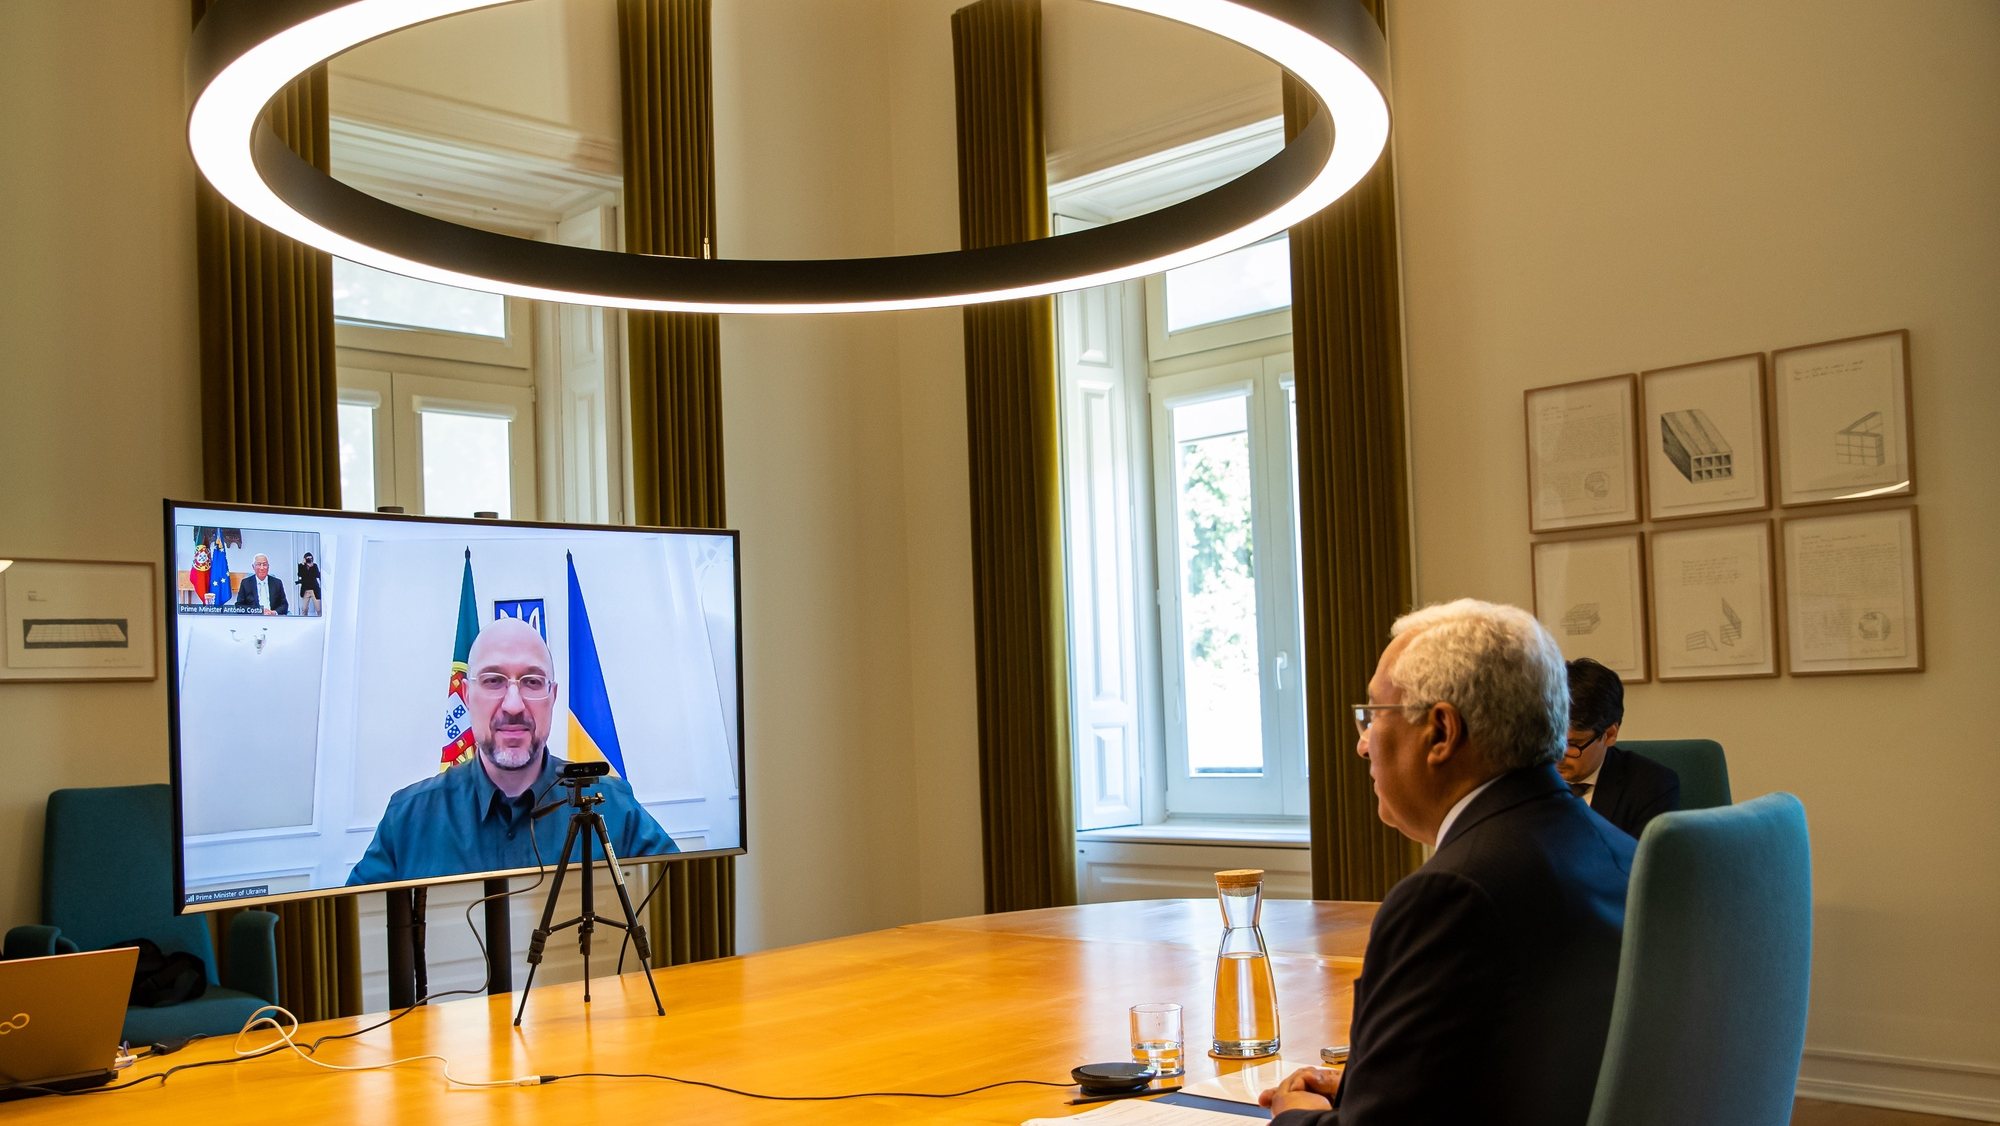 The portuguese Prime Minister Antonio Costa (R) speaks with his Ukranian counterpart Denys Shmygal in a zoom meeting to discuss the bilateral cooperation between the two countries and to analyze the current situation in the war between Russia and Ukraine, at Palacio de Sao Bento, in Lisbon, Portugal, 04 May 2022. JOSÉ SENA GOULÃO/LUSA